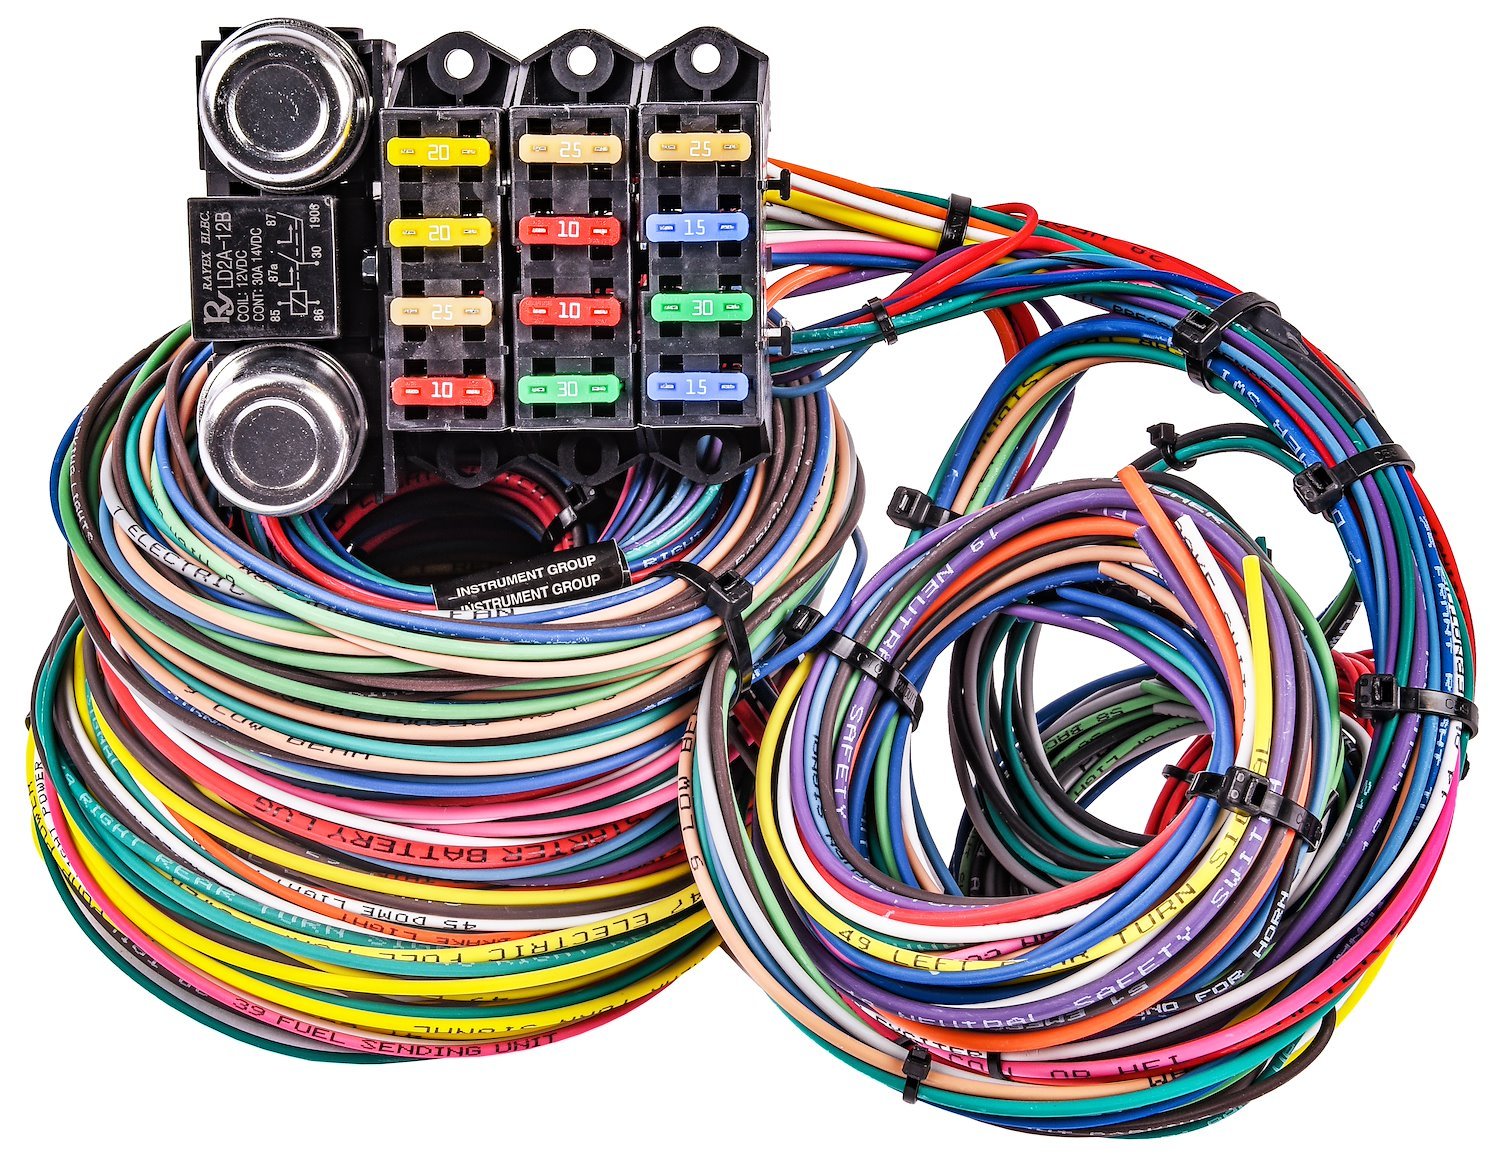 JEGS 10411 Universal Wiring Harness [14-Circuit with Fuse Block]